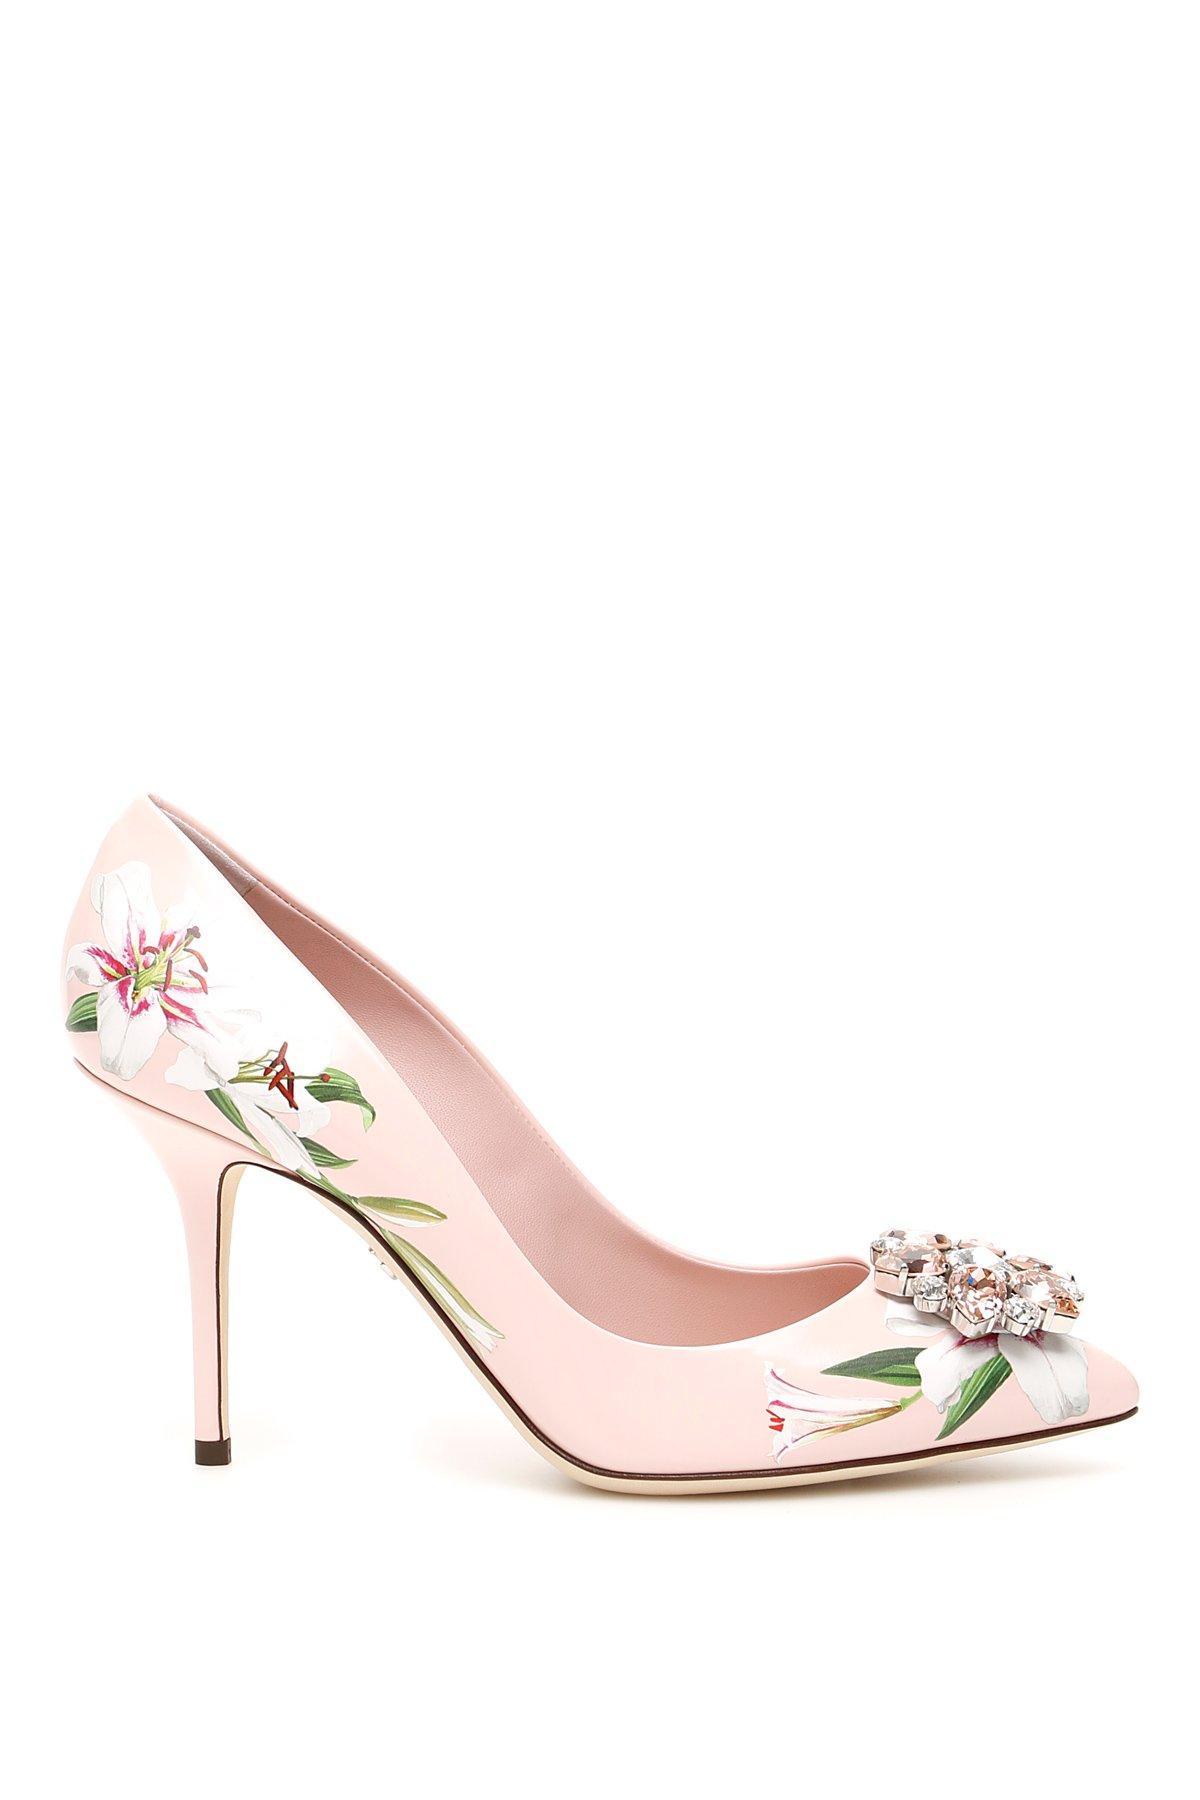 Dolce & Gabbana Lily Print Pumps in Pink - Save 15% - Lyst